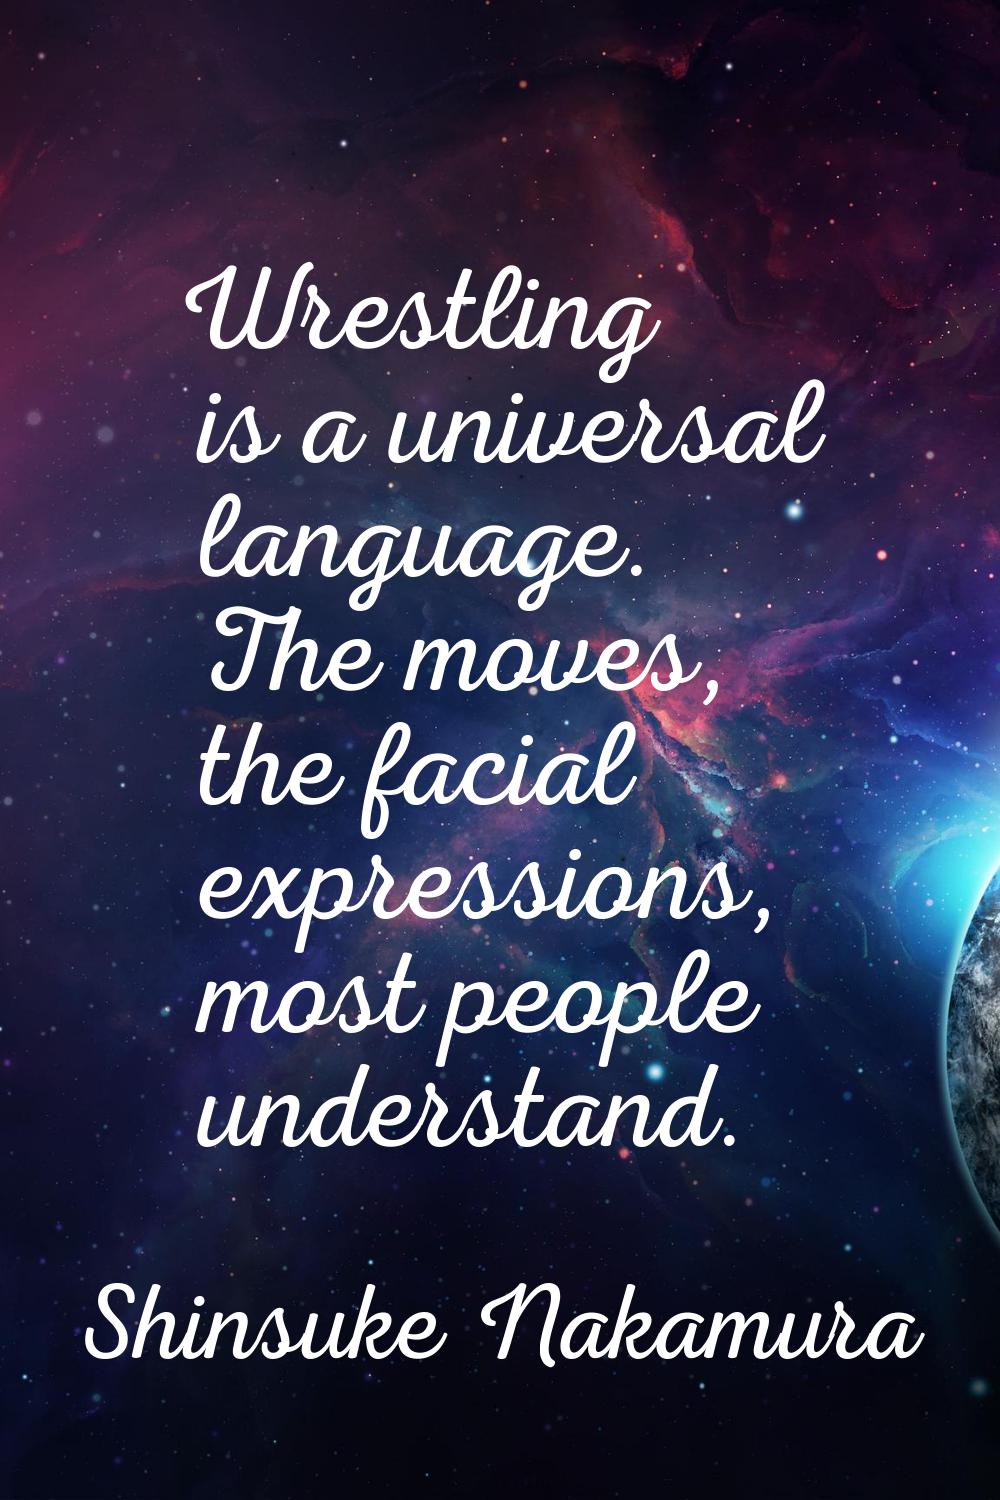 Wrestling is a universal language. The moves, the facial expressions, most people understand.